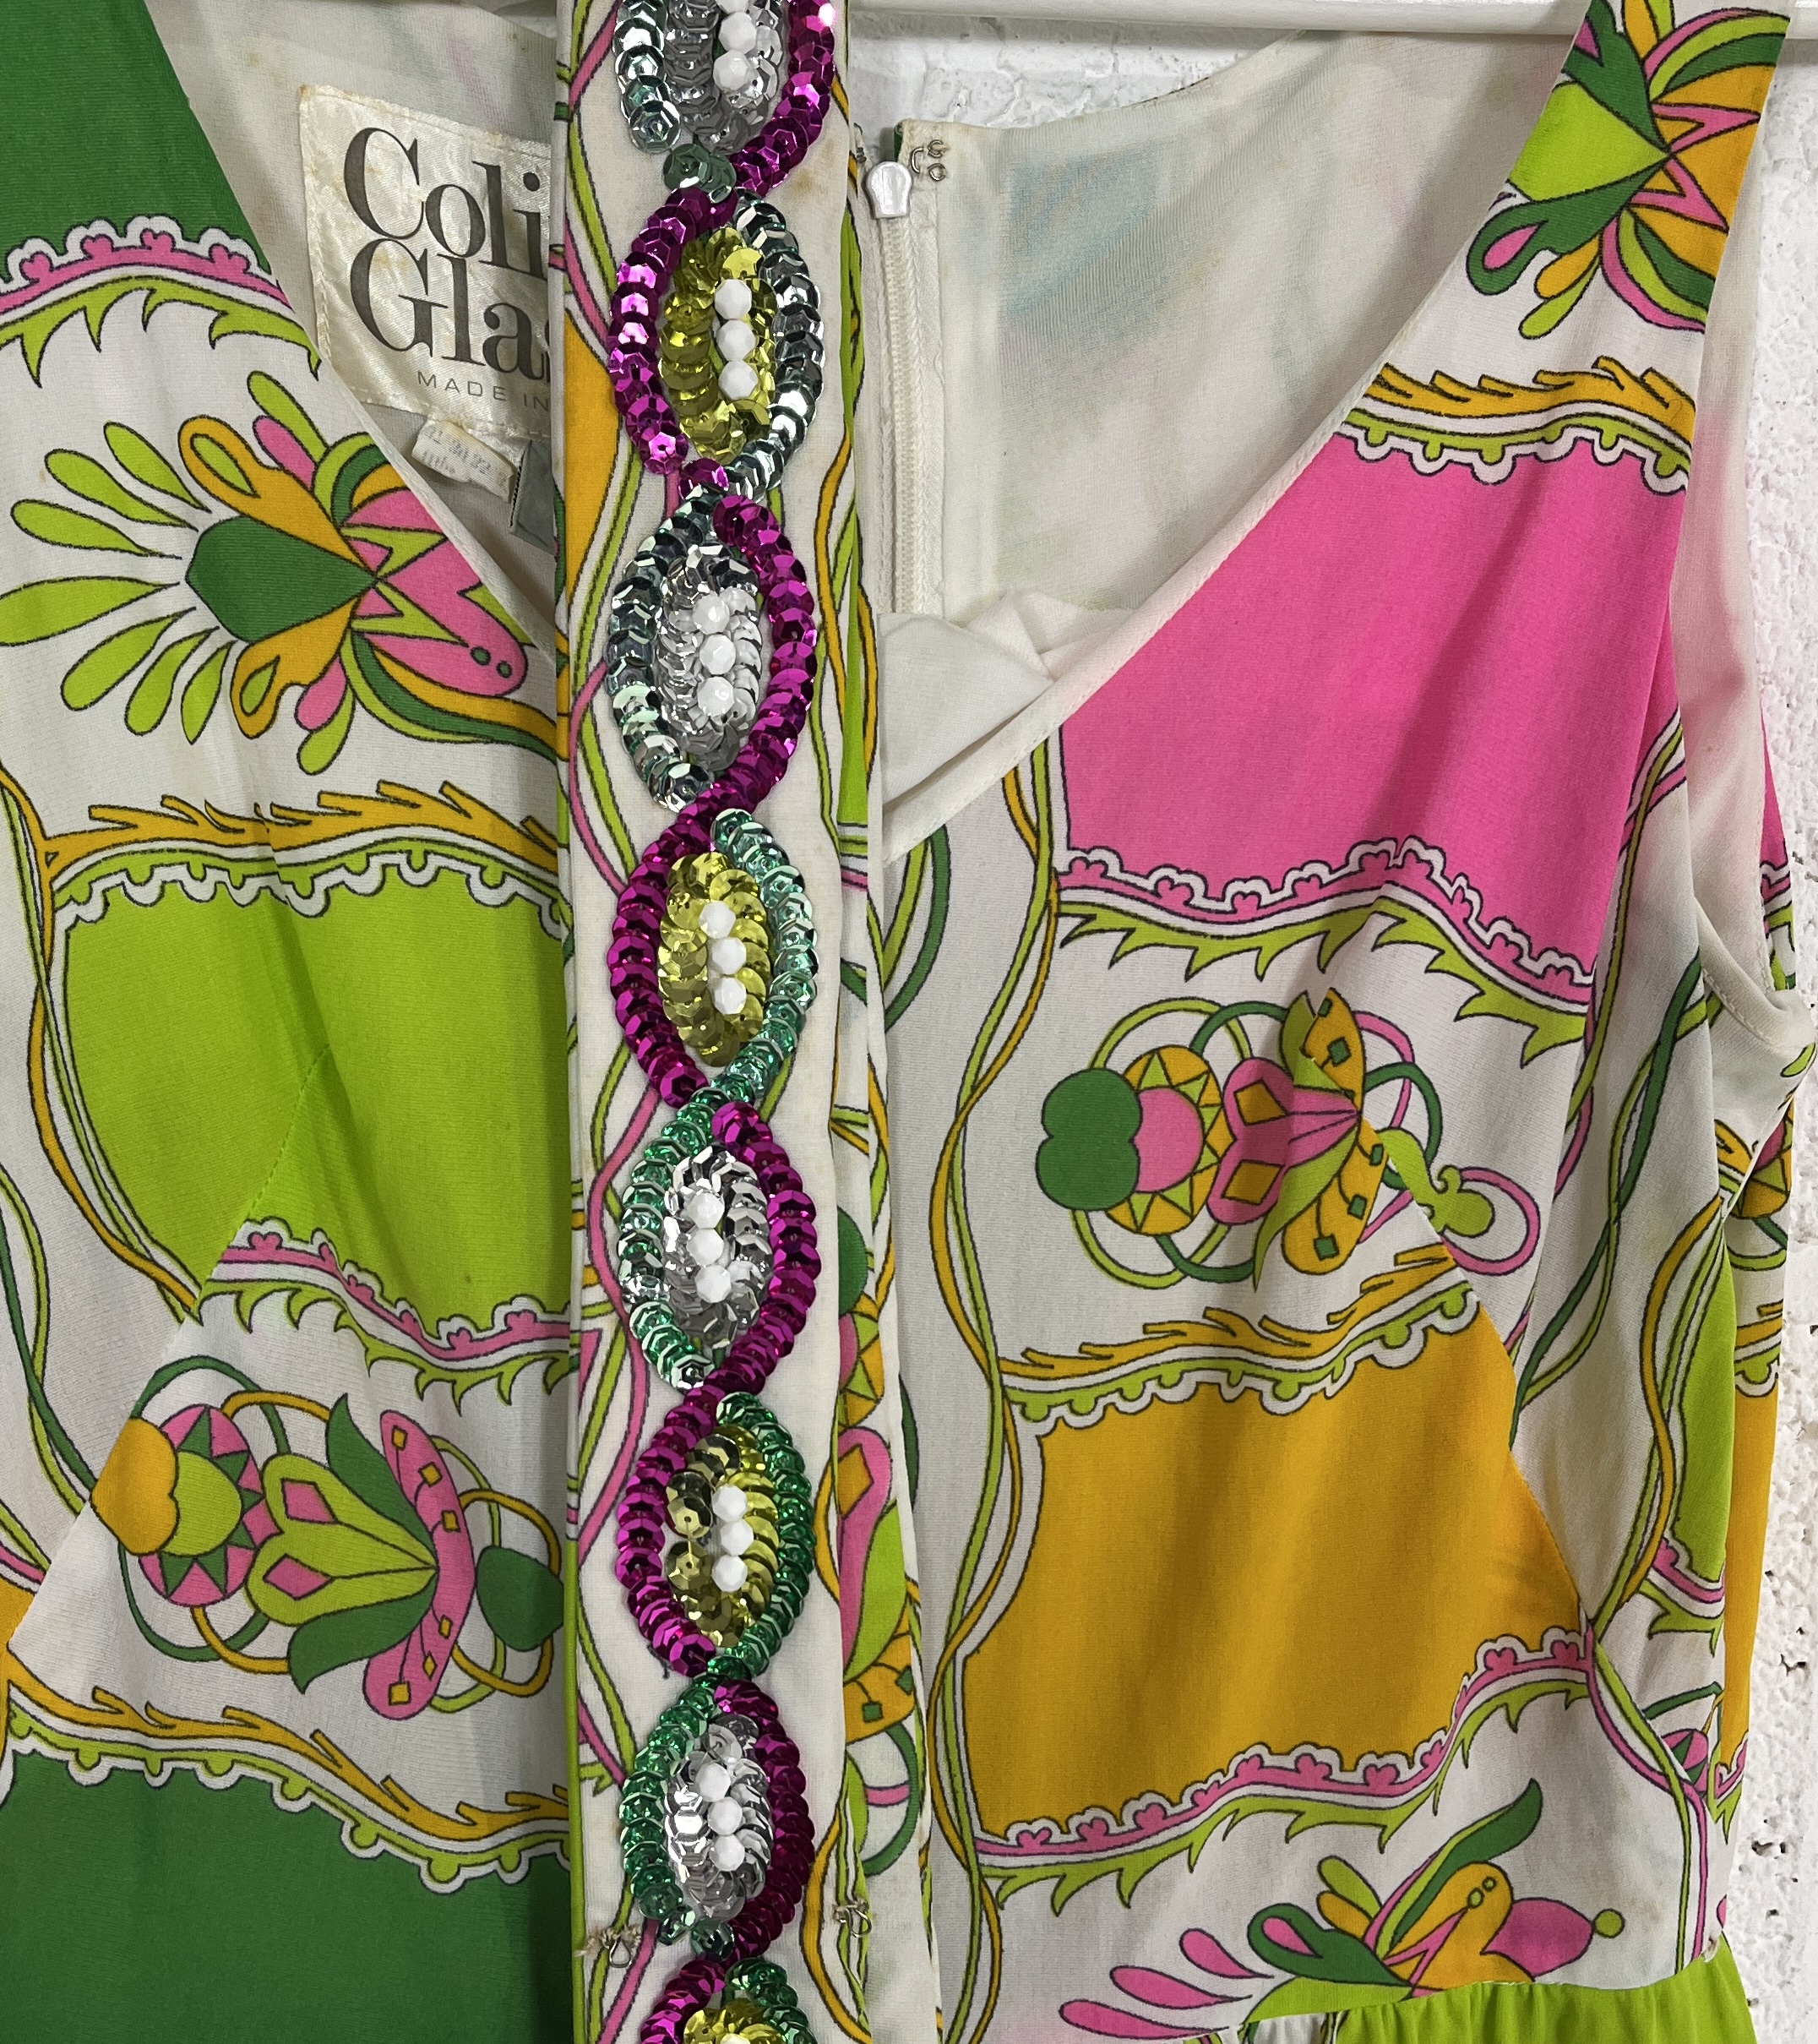 A vintage 1970's jumpsuit by Colin Glascoe with brightly coloured floral design - Image 5 of 6